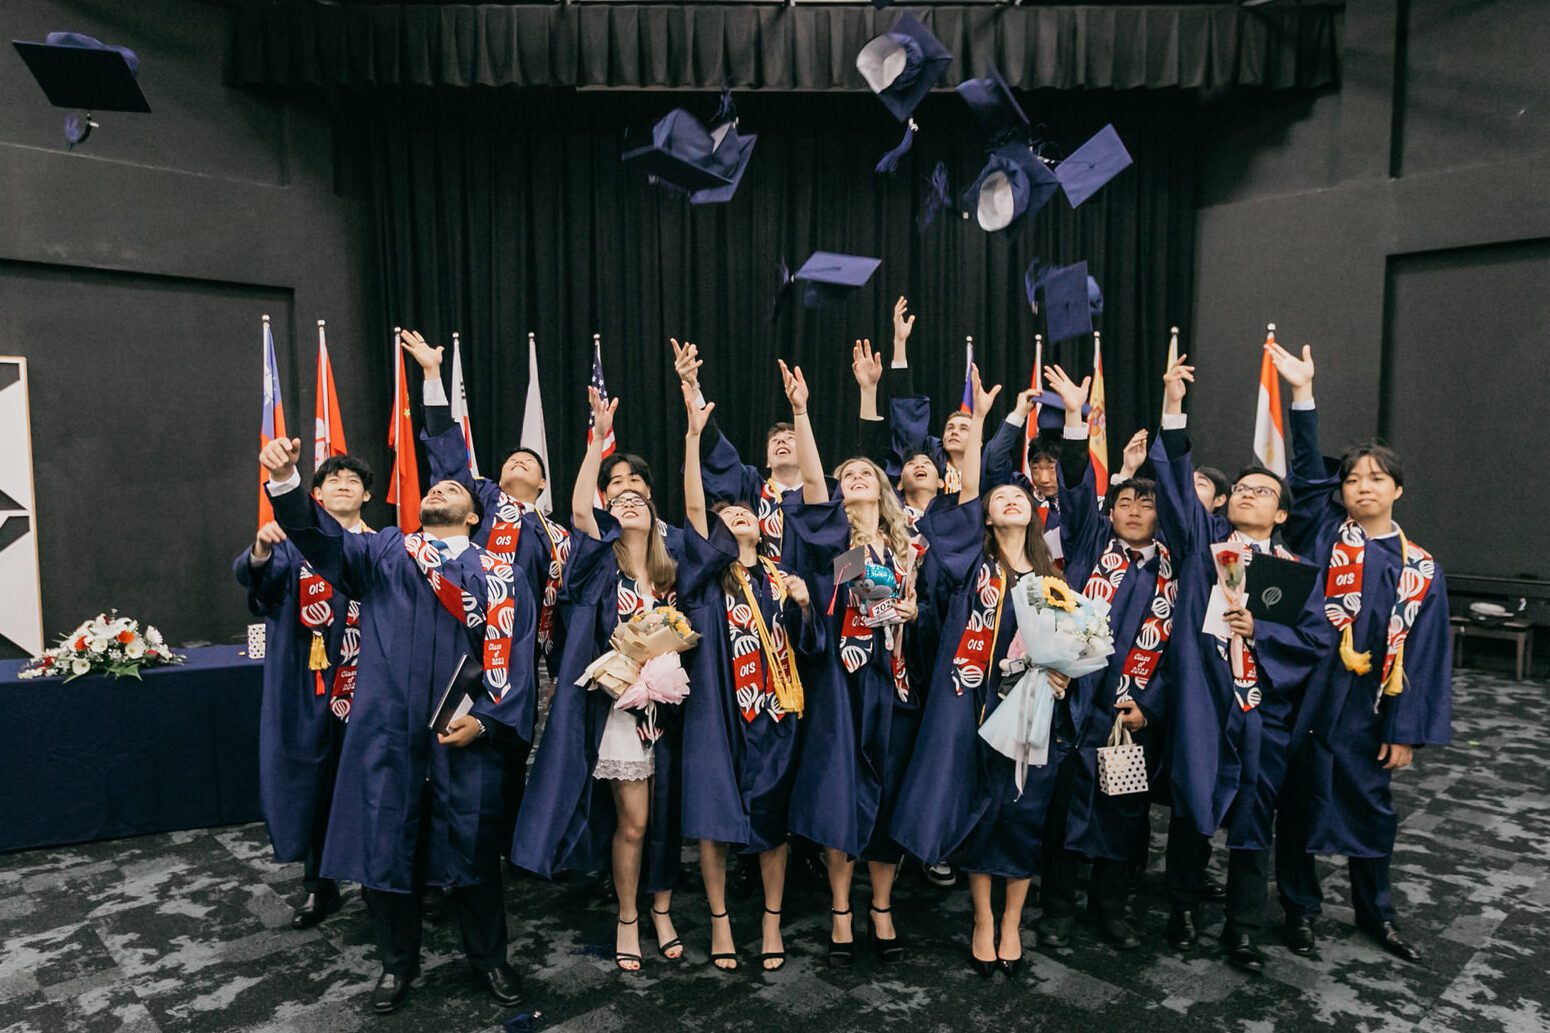 A festive celebration with confetti and cheers, congratulating the graduates of Oasis International School 2023 on their remarkable achievement.